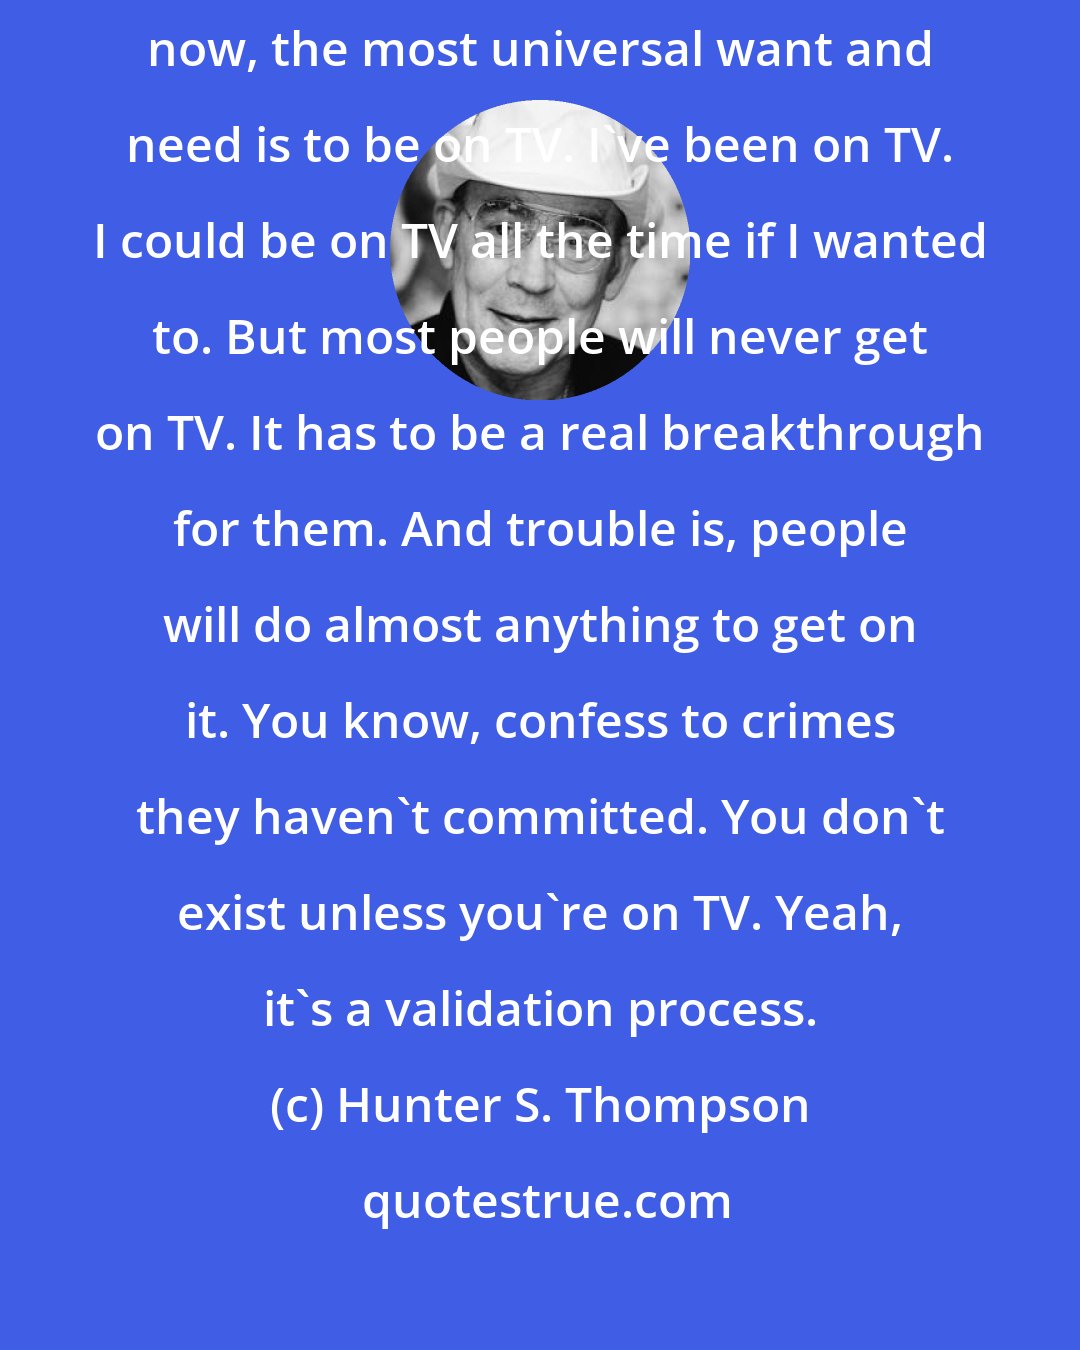 Hunter S. Thompson: I believe that the major operating ethic in American society right now, the most universal want and need is to be on TV. I've been on TV. I could be on TV all the time if I wanted to. But most people will never get on TV. It has to be a real breakthrough for them. And trouble is, people will do almost anything to get on it. You know, confess to crimes they haven't committed. You don't exist unless you're on TV. Yeah, it's a validation process.